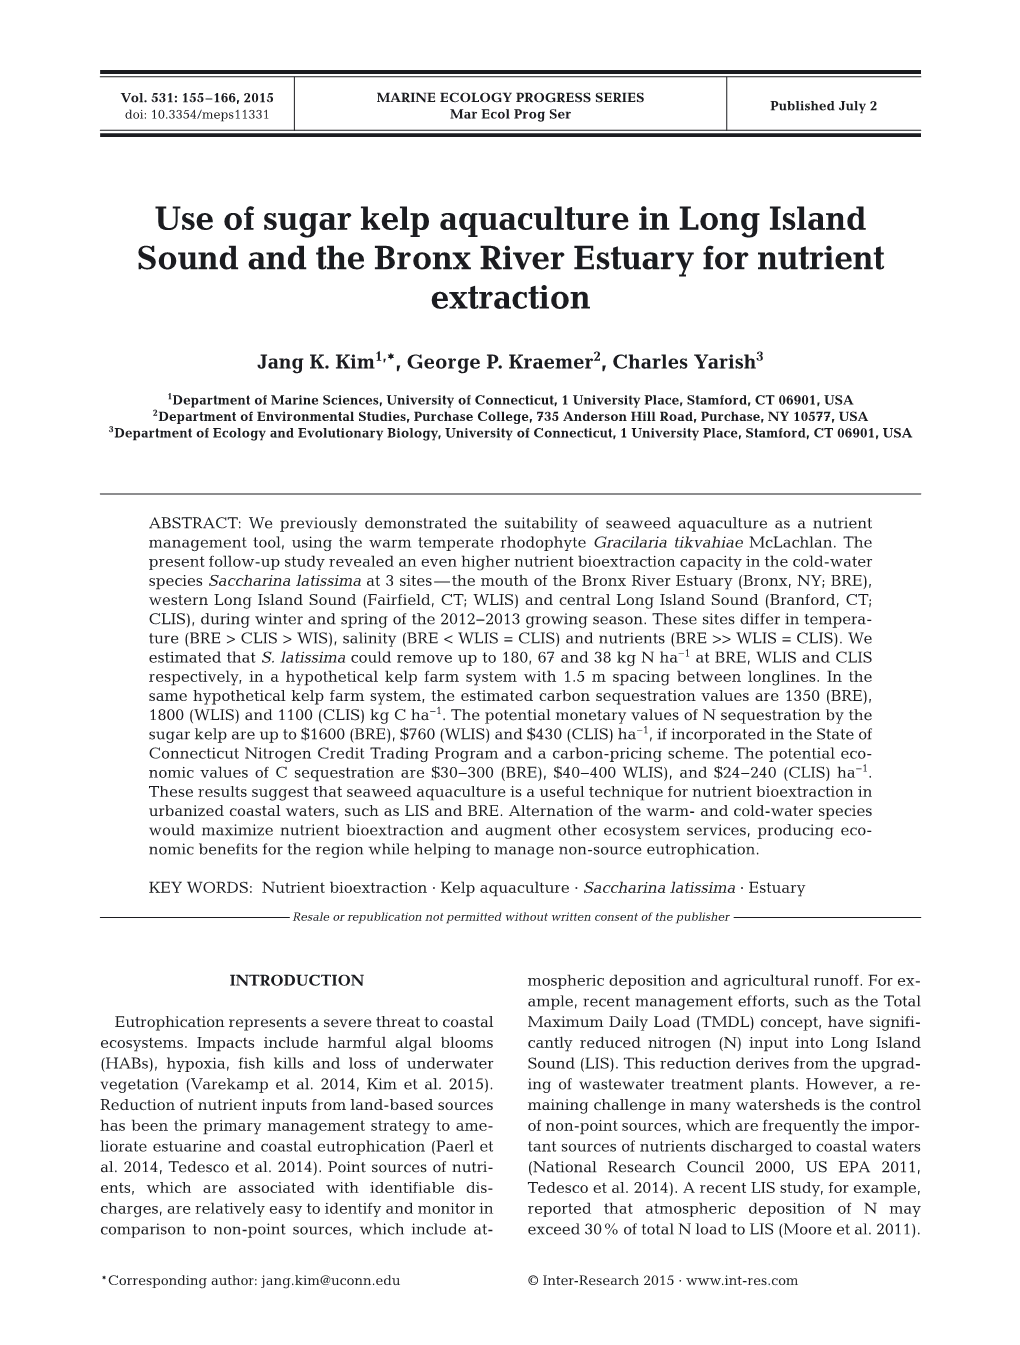 Use of Sugar Kelp Aquaculture in Long Island Sound and the Bronx River Estuary for Nutrient Extraction